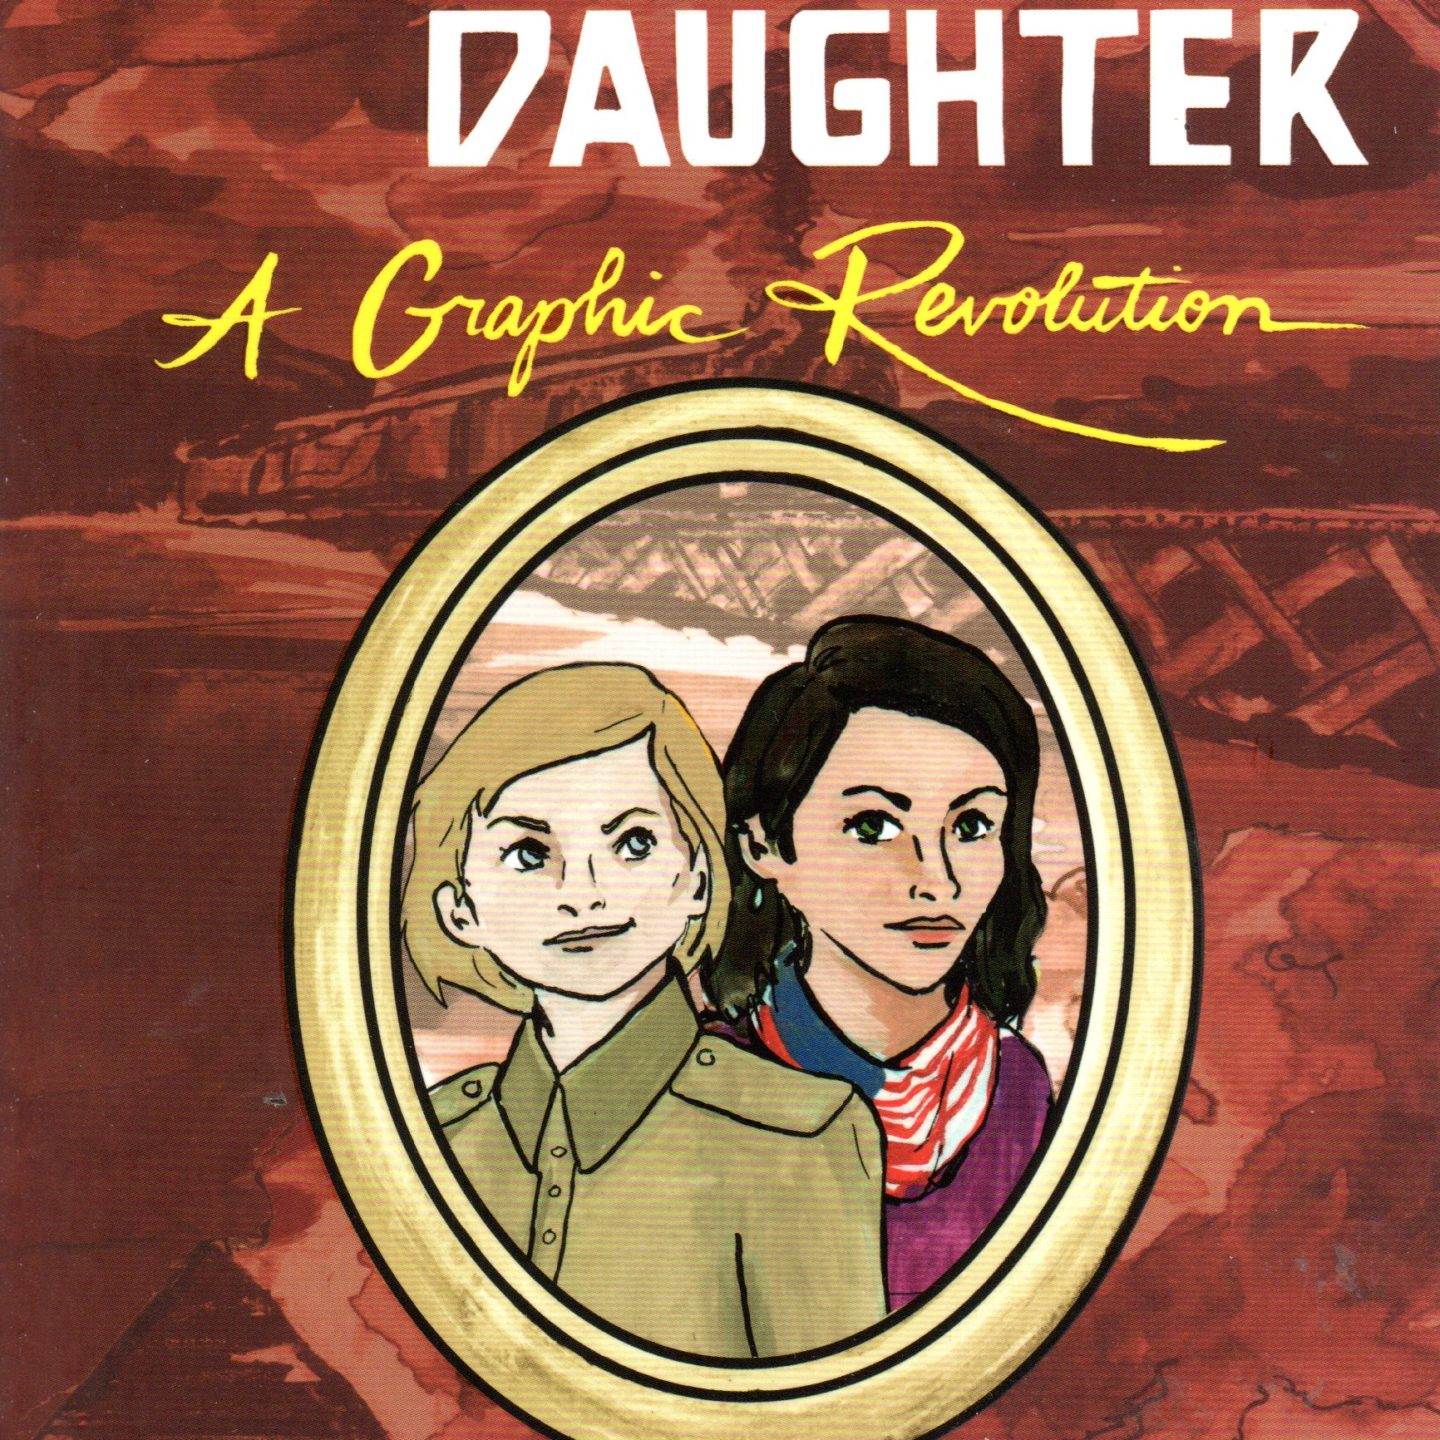 Review time! with ‘Soviet Daughter: A Graphic Revolution’